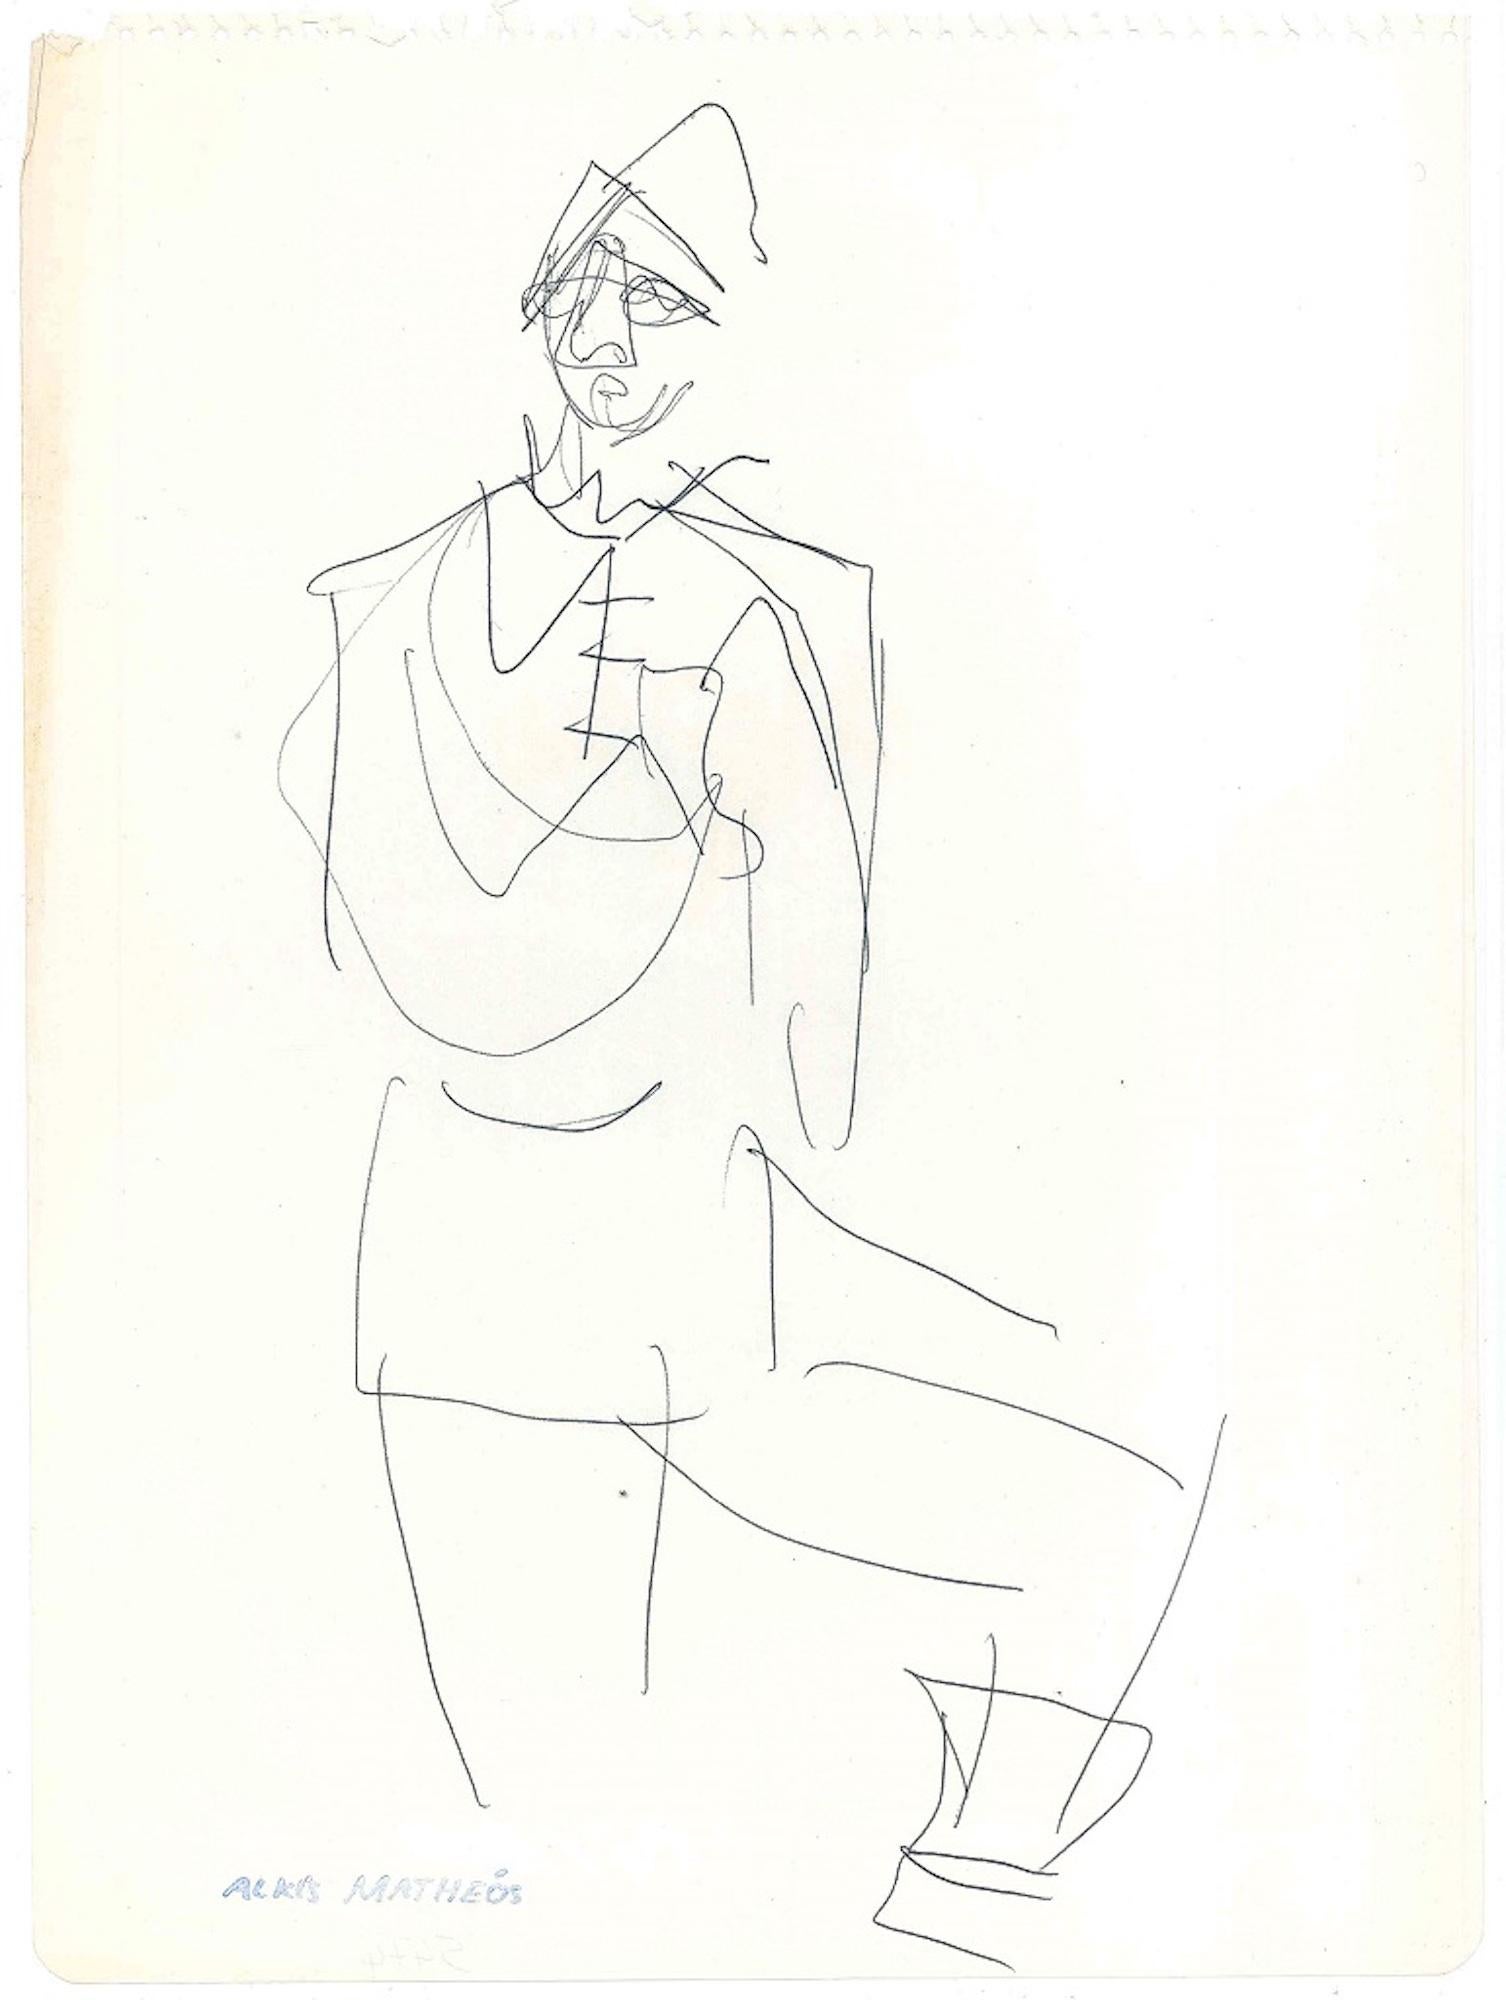 Alkis Matheos Figurative Art - Sketch for a Costume  - Original China Ink on Paper by A. Matheos 